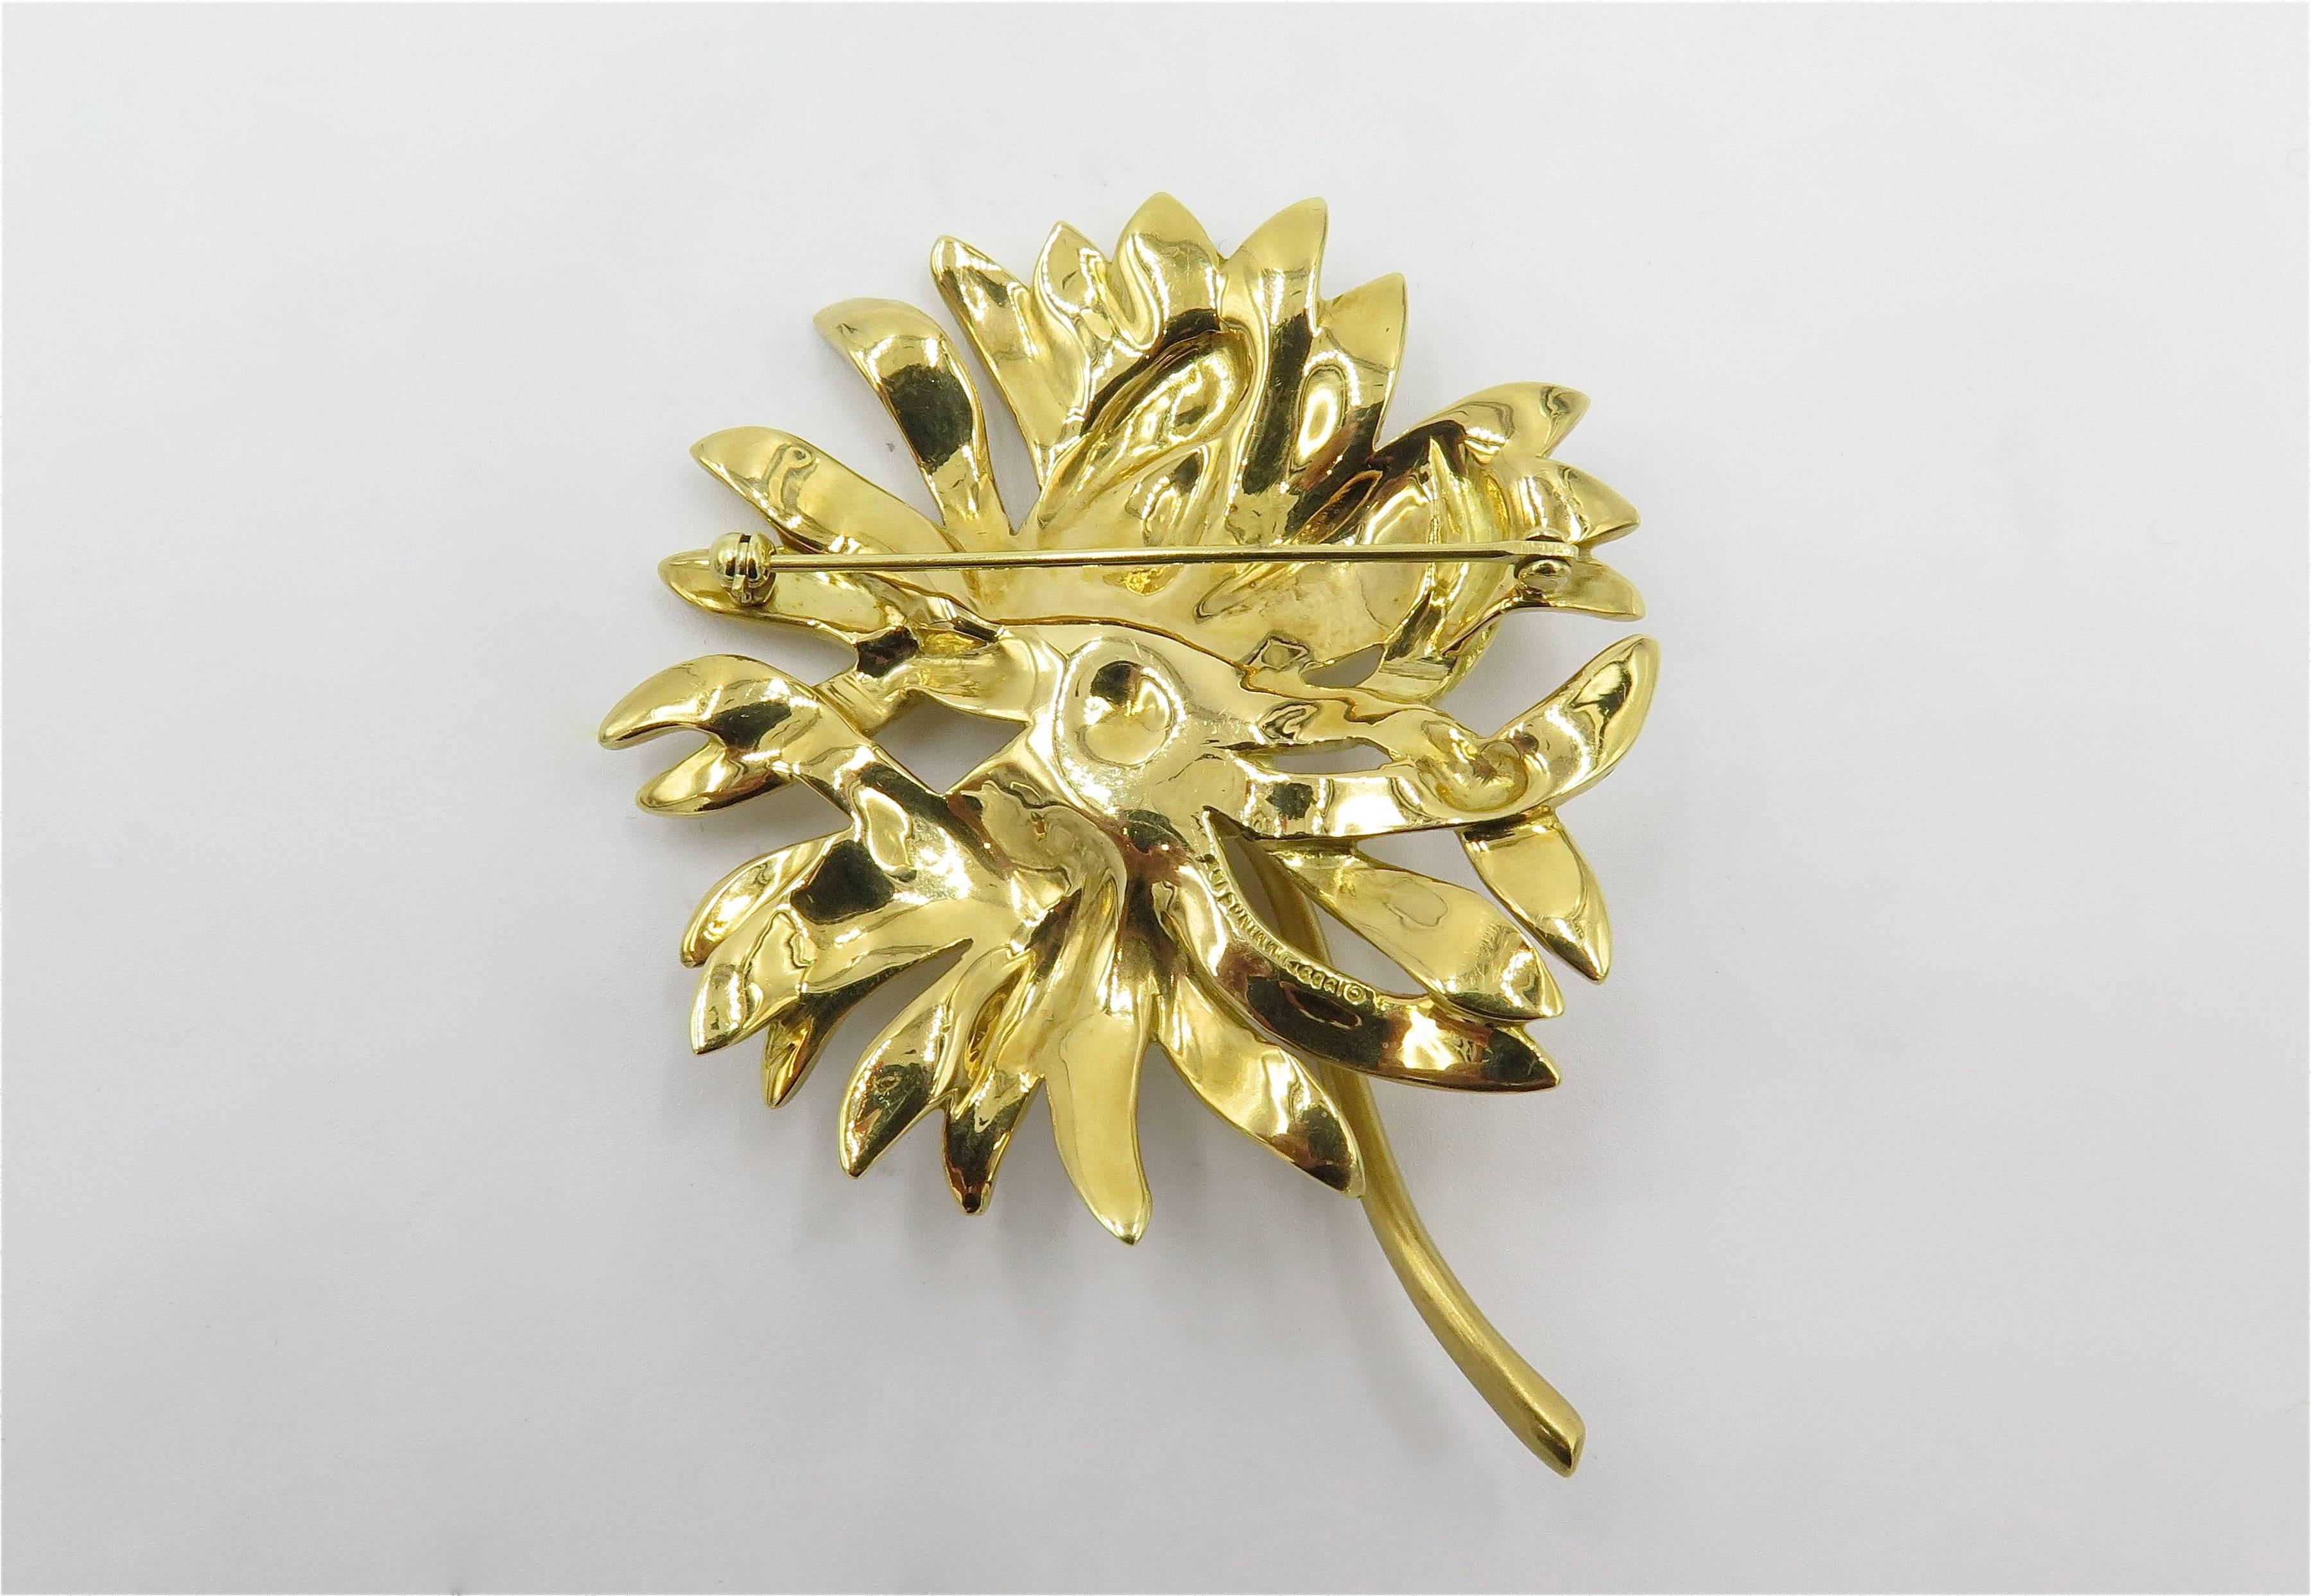 An 18 karat yellow gold brooch. Angela Cummings. Designed as a textured gold reverse textured gold chrysanthemum, with polished gold stem. Length is approximately 2 3/4 inches. Gross weight is approximately 36.4 grams. Stamped Cummings 18K, 1989. 